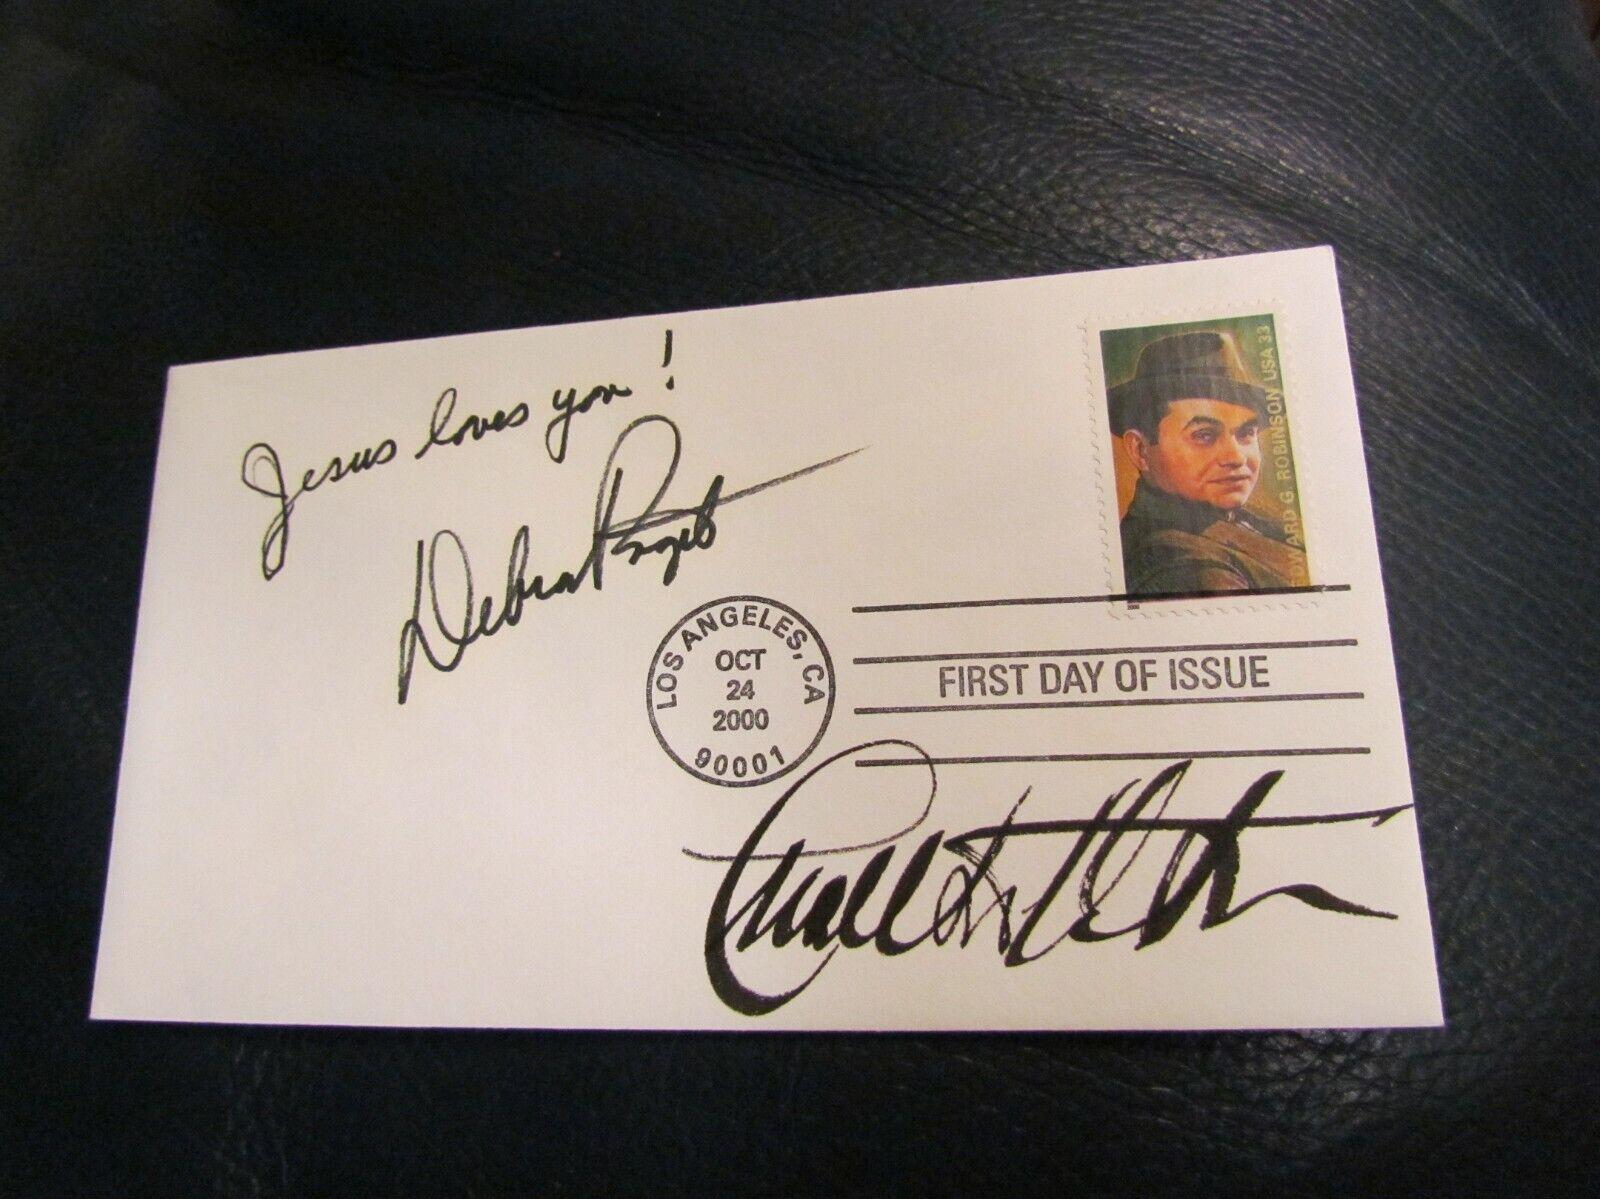 Charlton Heston Debra S Signed Autographed 1st Day Cover